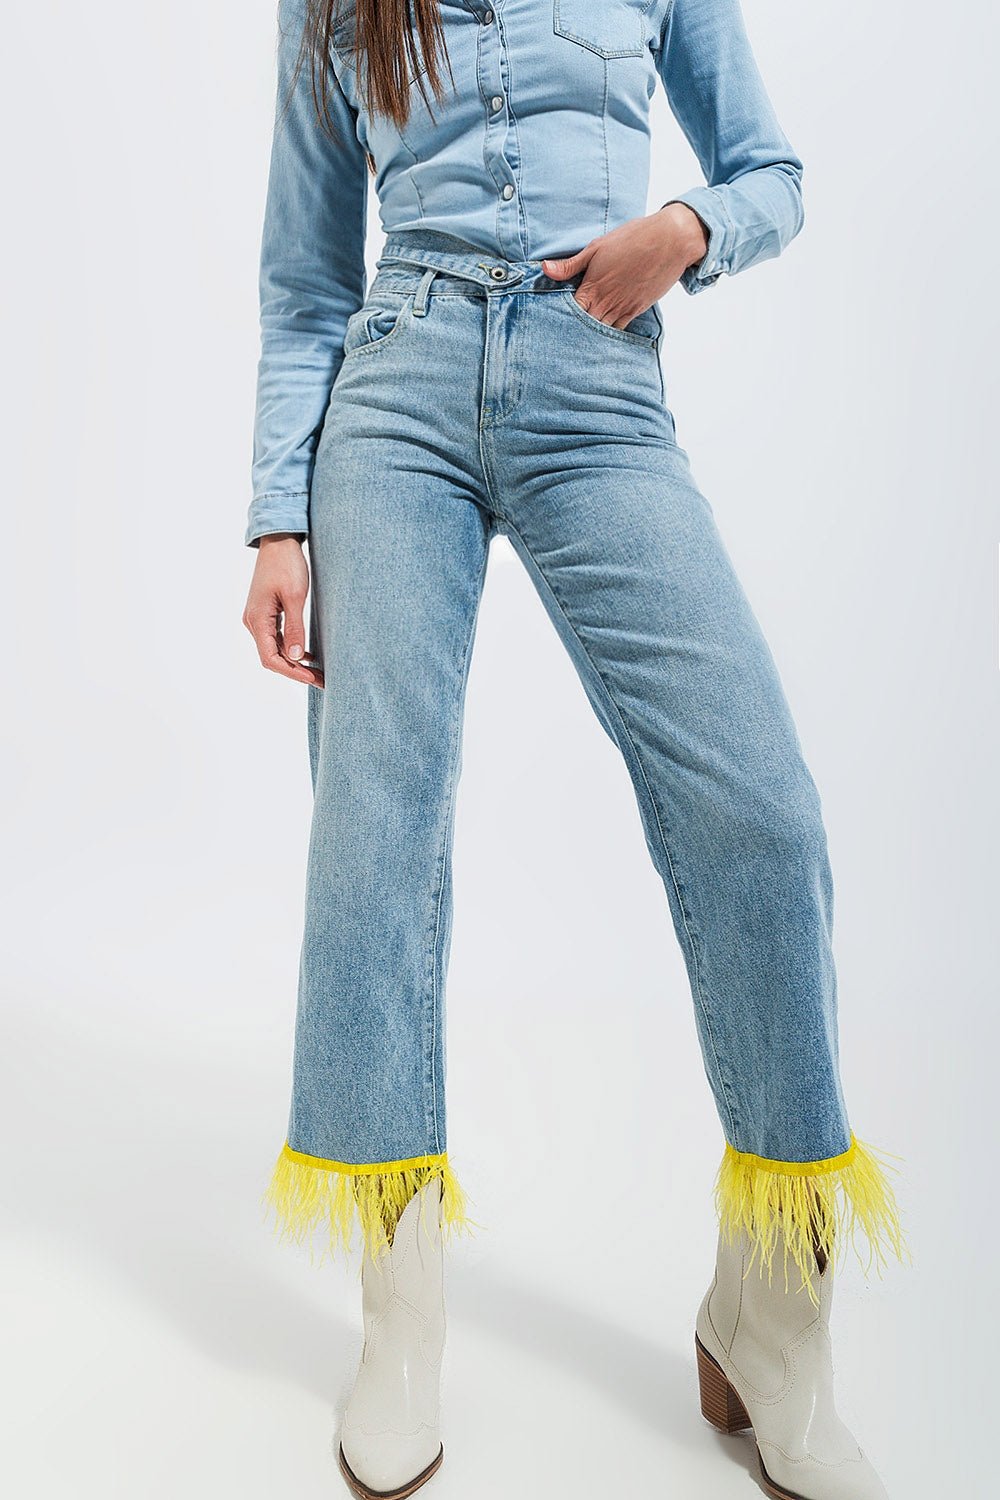 Straight Leg Jeans With Yellow Faux Feather Hem - Mack & Harvie